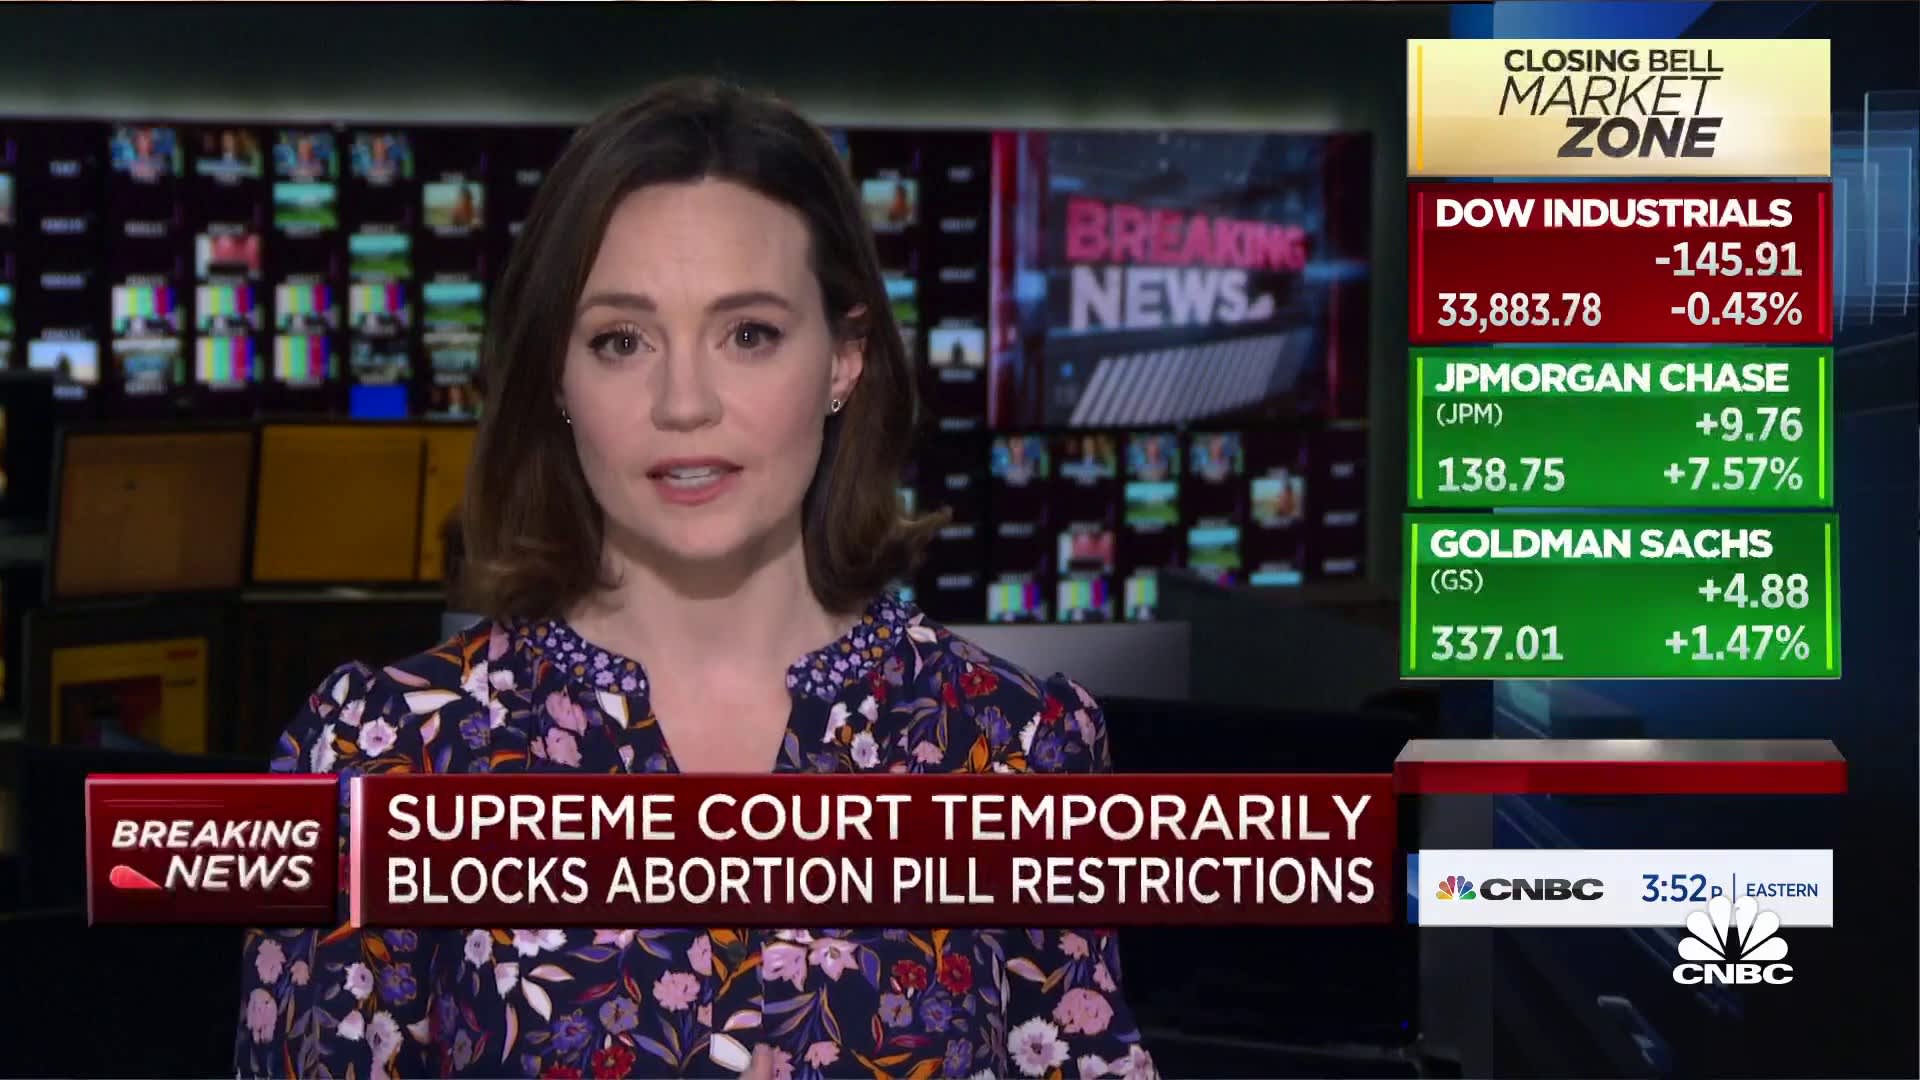 Supreme Court temporarily blocks abortion pill restrictions